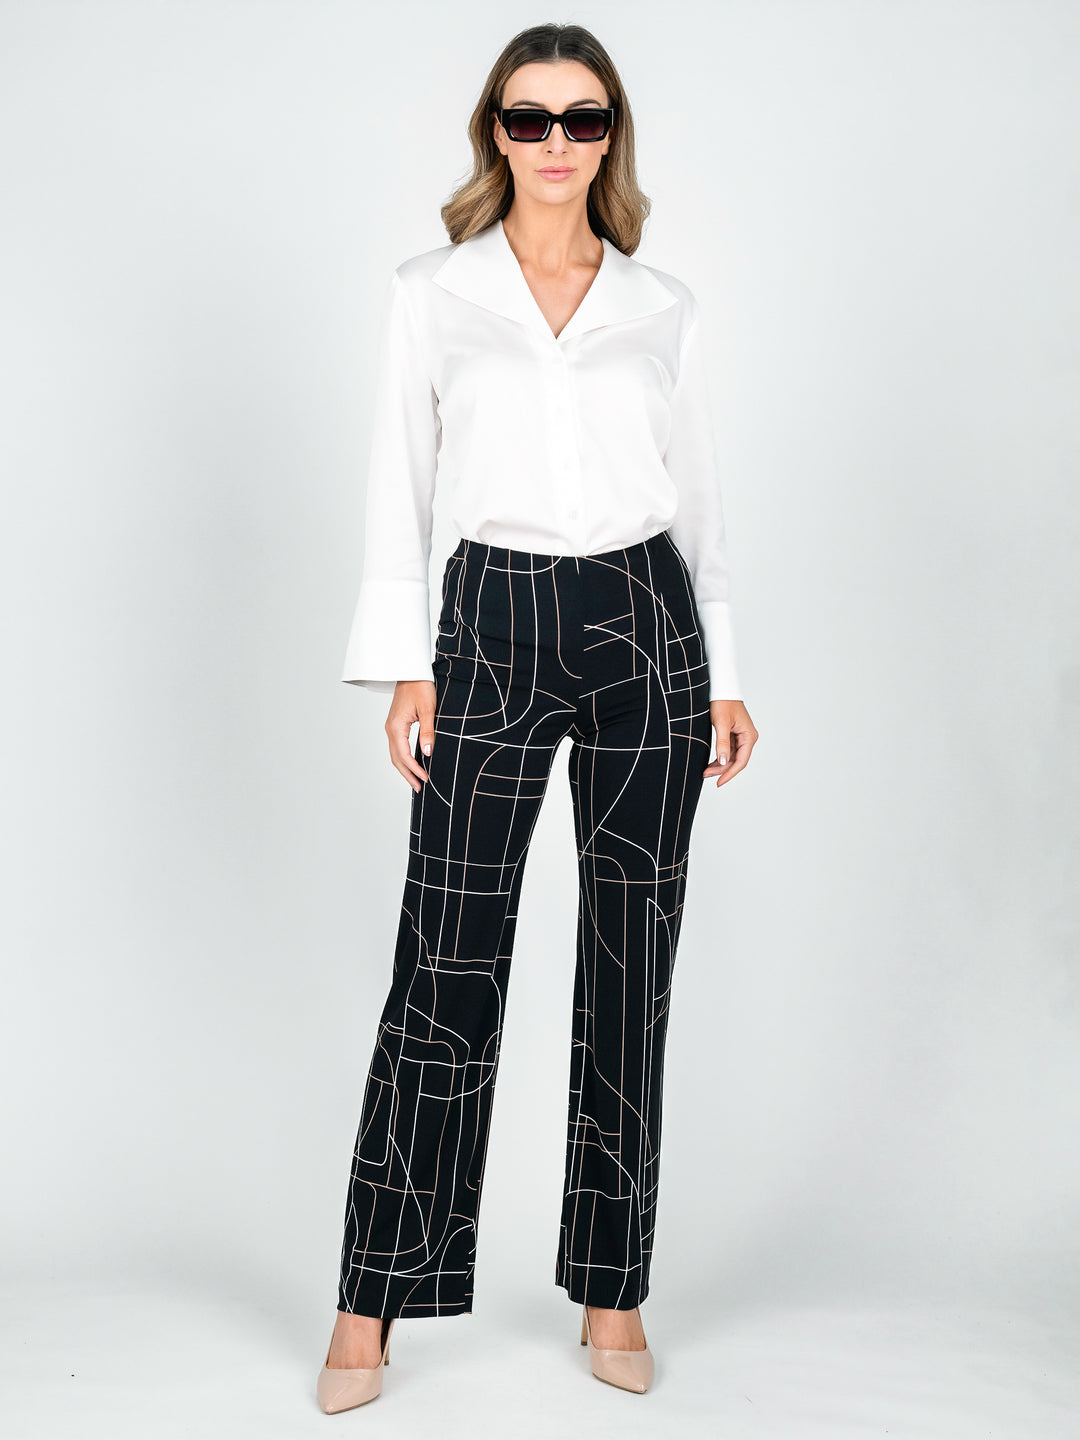 Women's stretchy jersey wide leg work pants with tan and white lines printed on black tucked in